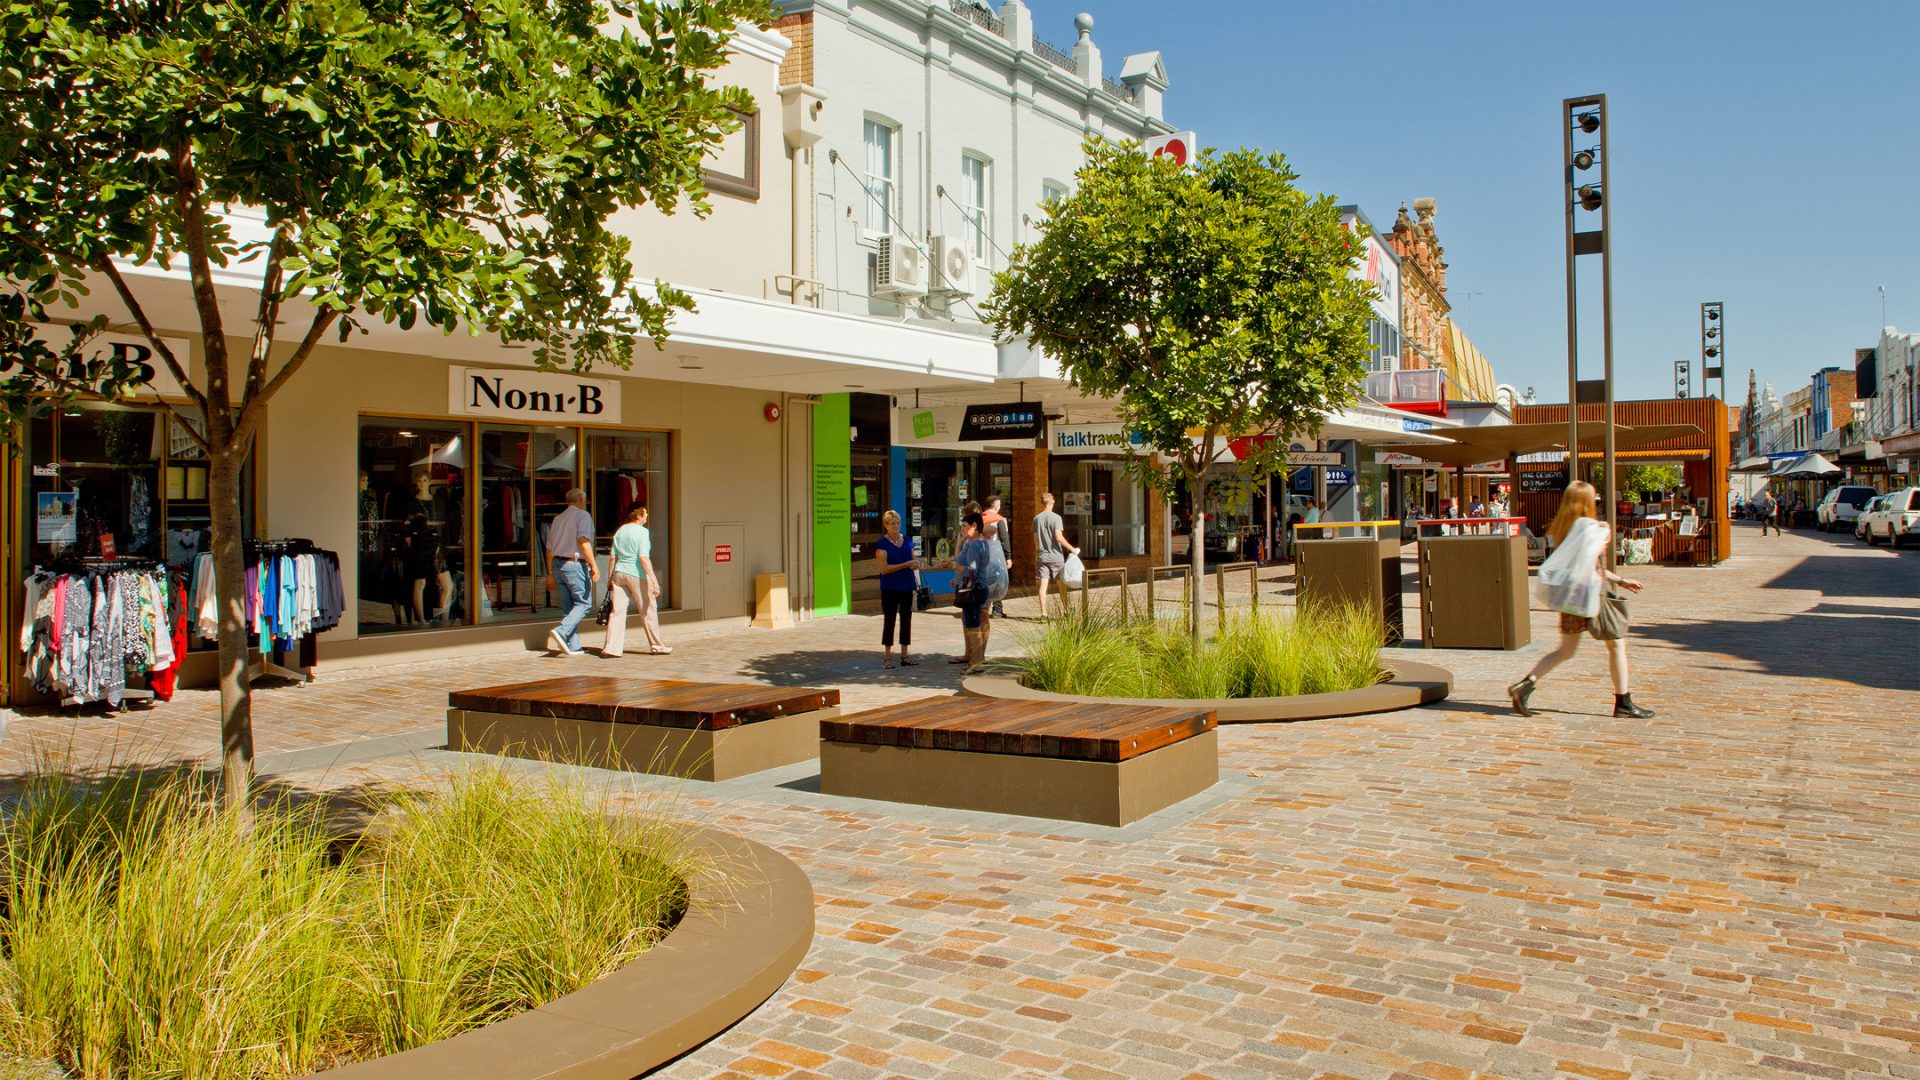 A lively pedestrian shopping street in Maitland features trees and modern benches surrounded by greenery. Stores, including a clothing store named Noni B, line both sides of the Levee. Several people are walking, browsing, and relaxing in the pleasant, sunny environment.